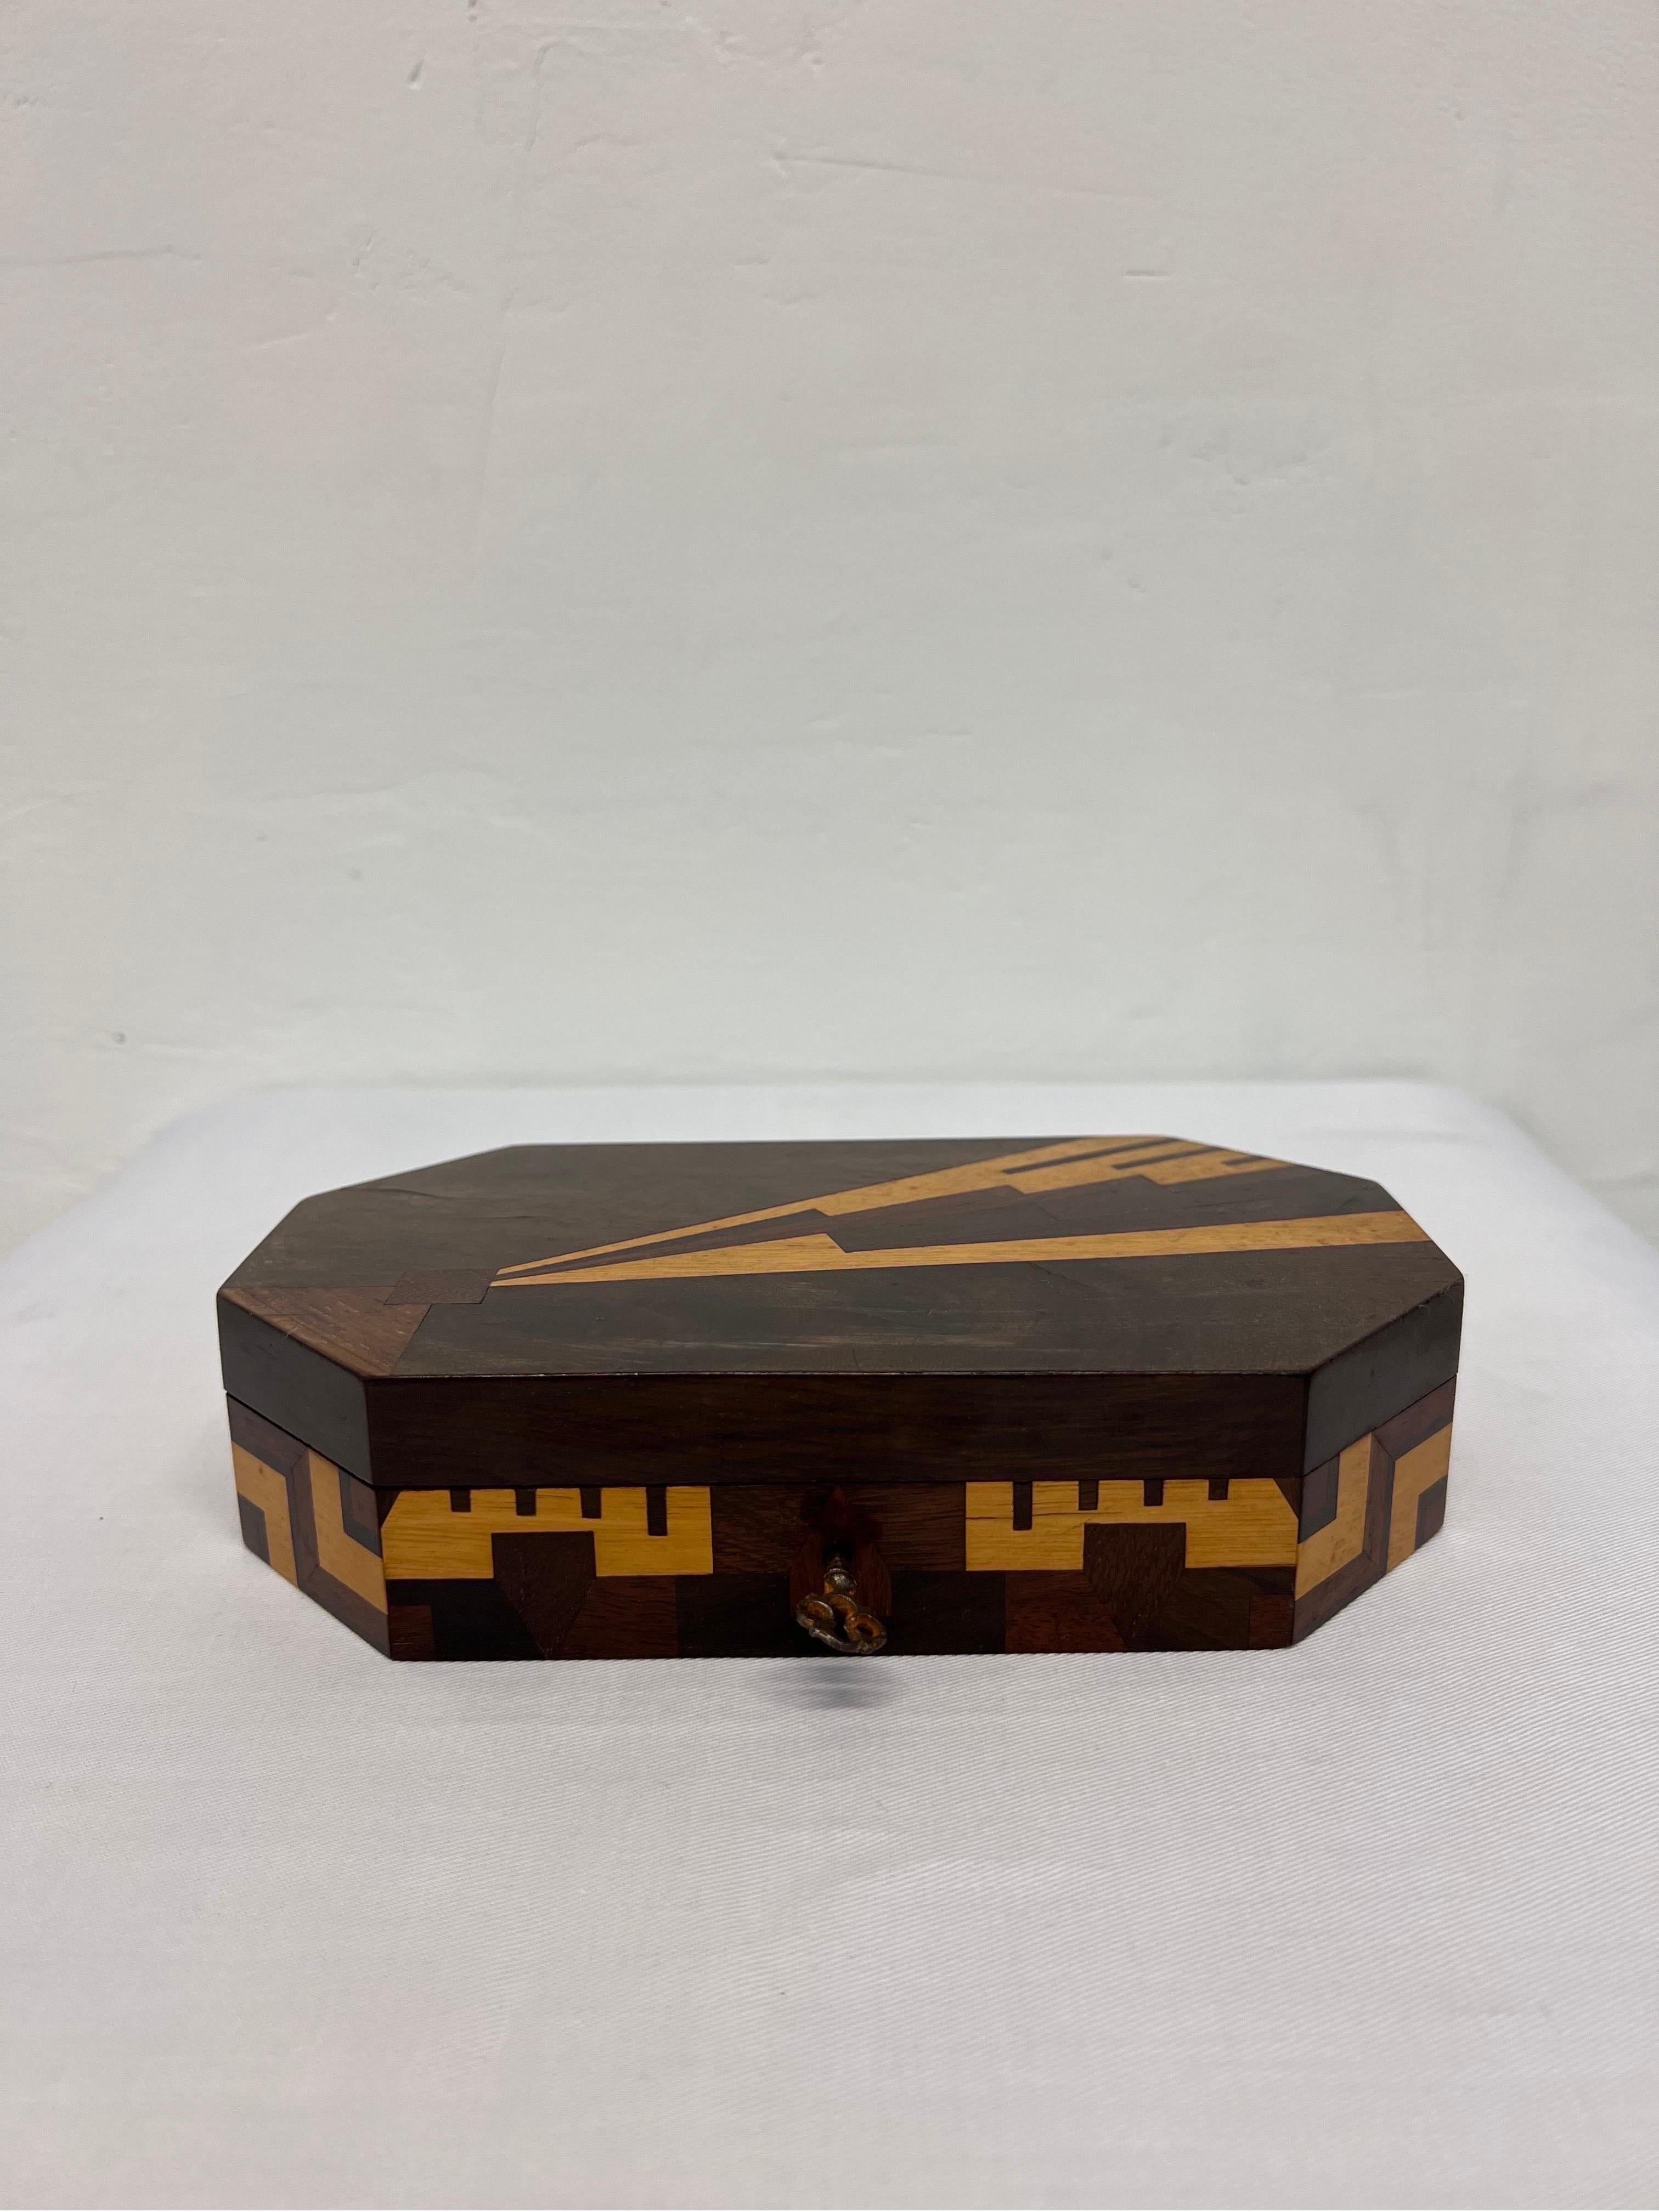 Brazilian Jacaranda jewelry box with geometric marquetry both outside and under the lid. Box retains key and lock is functioning. Brazil, 1960s.